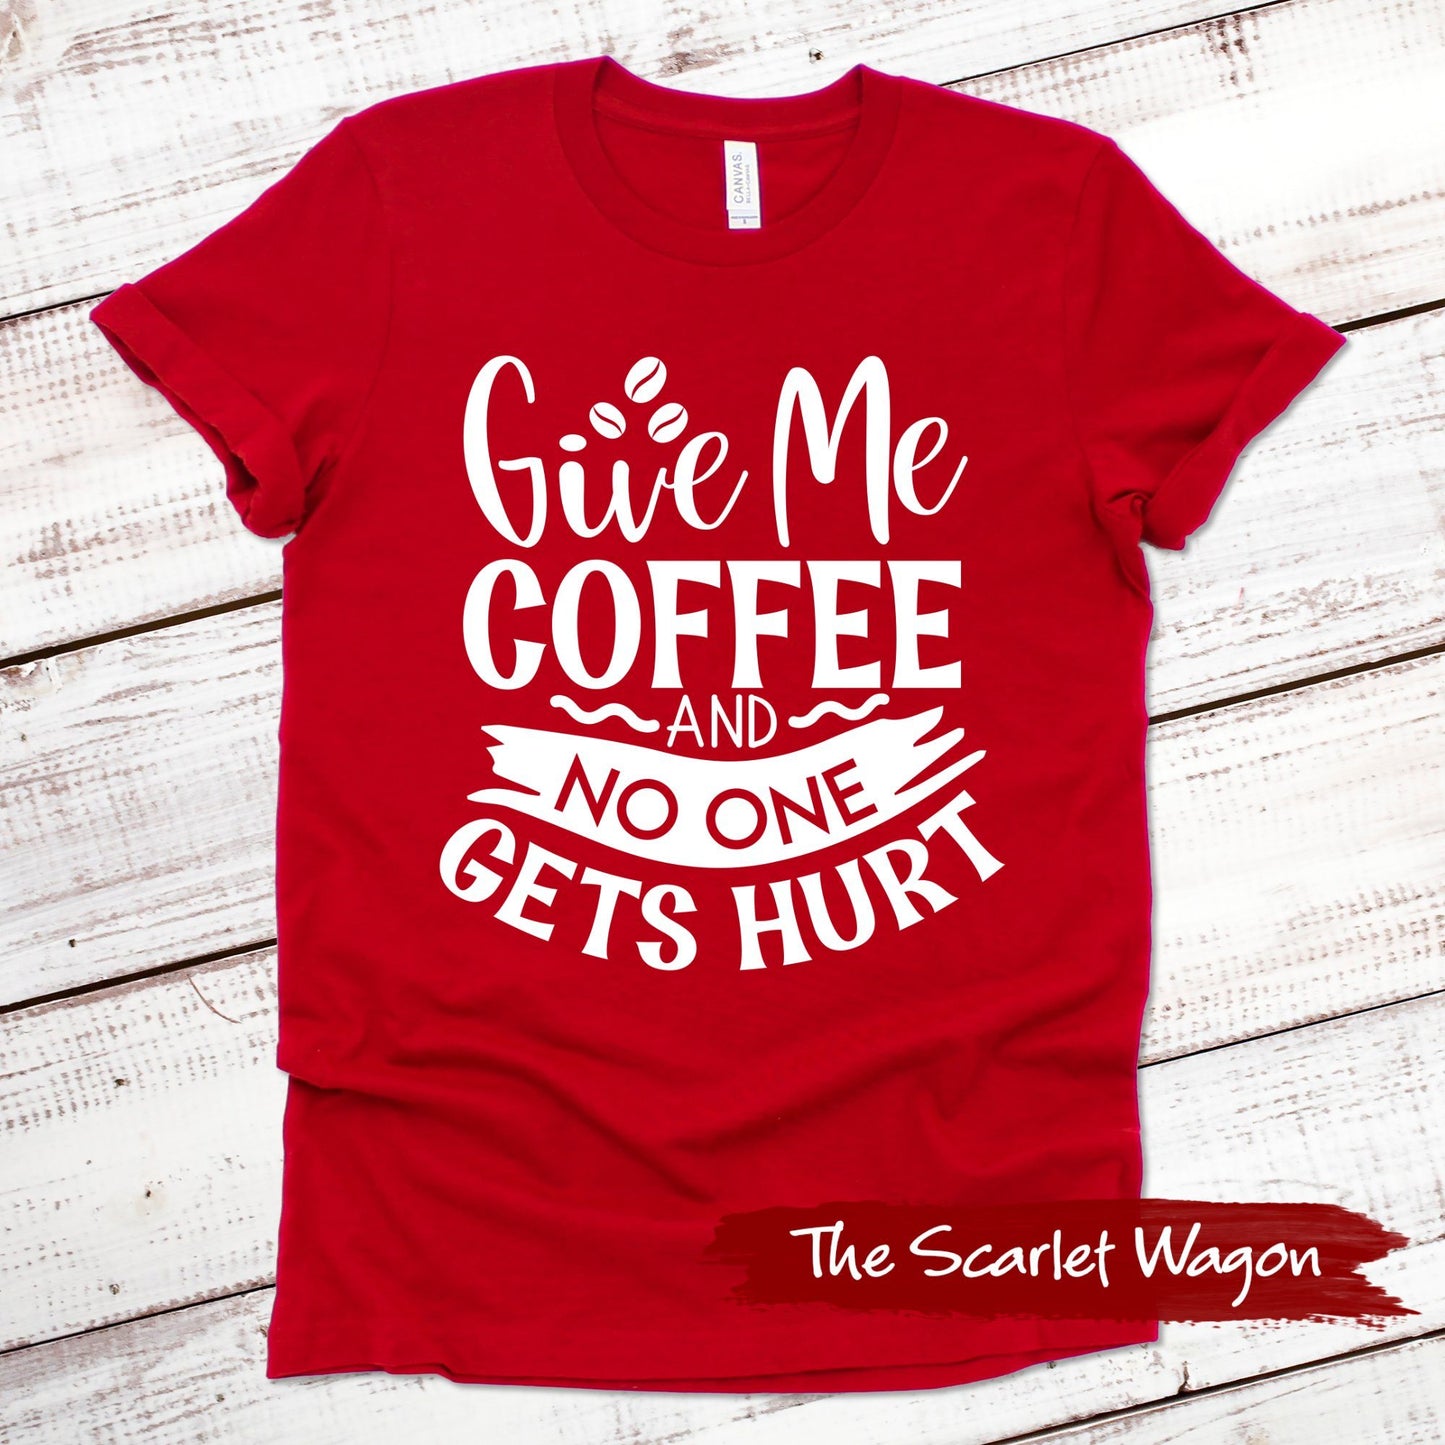 Give Me Coffee and No One Gets Hurt Funny Shirt Scarlet Wagon Red XS 